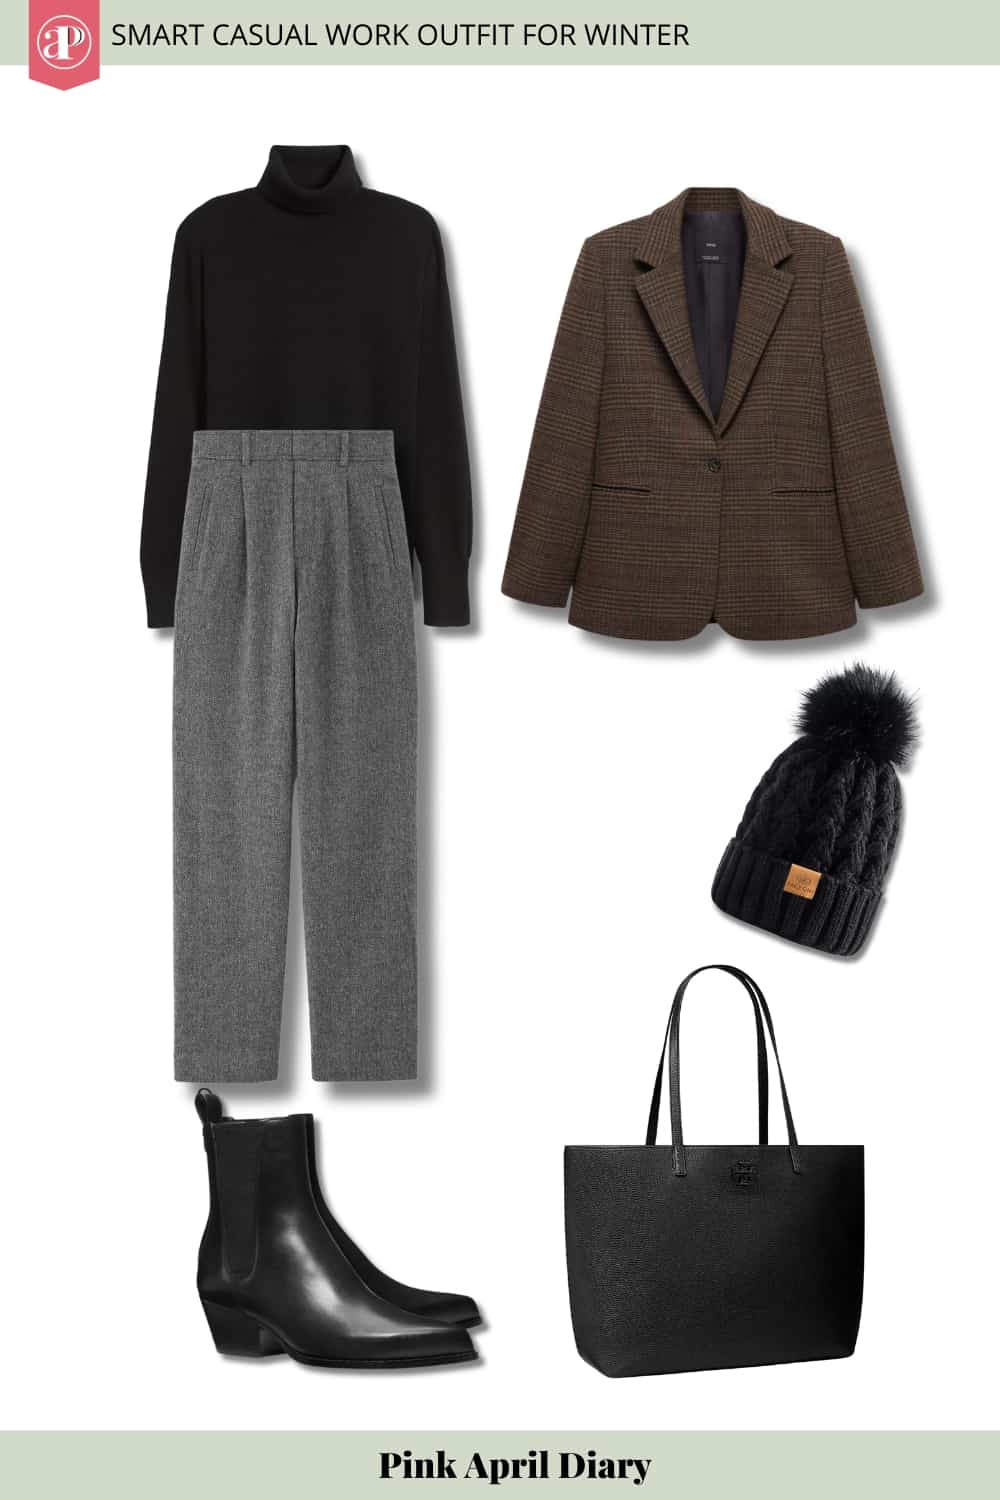 Smart Casual Winter Work Outfit 10